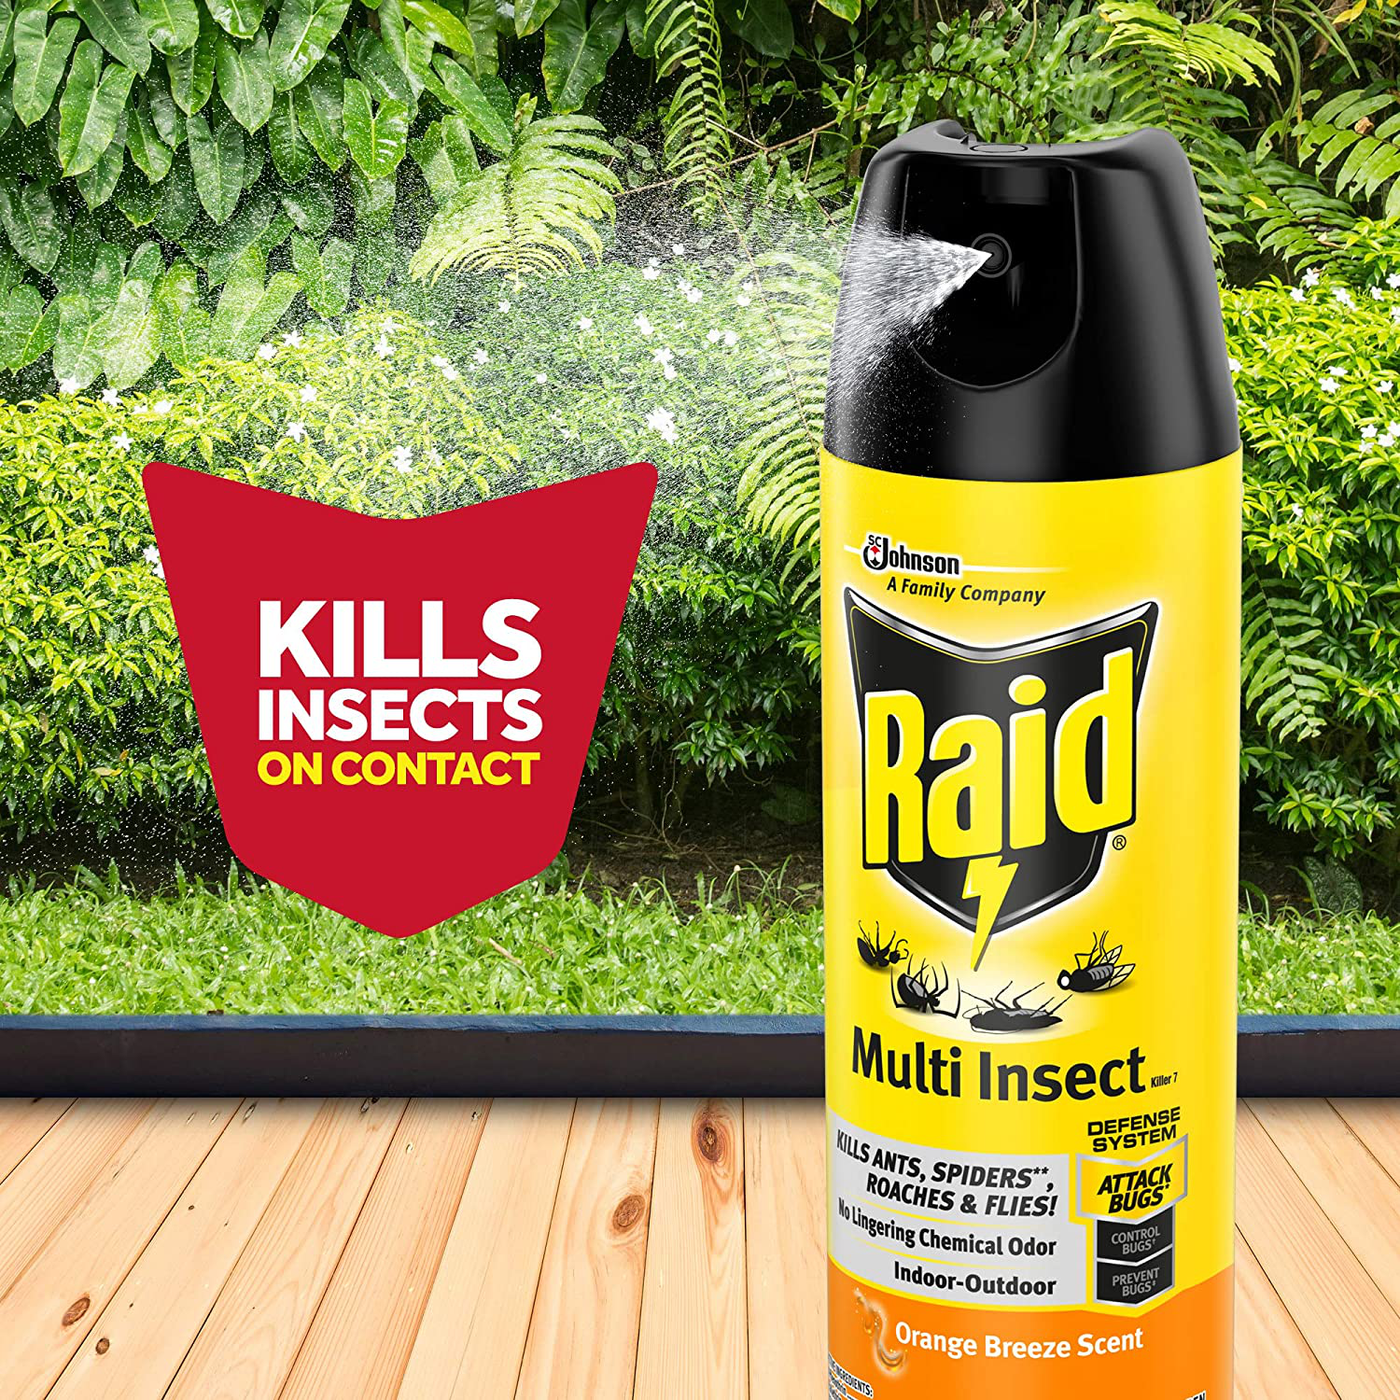 Raid Multi Insect Killer, Kills Ants, Spiders, Roaches and Flies, For Indoor and Outdoor use, Orange Breeze, 15 Oz